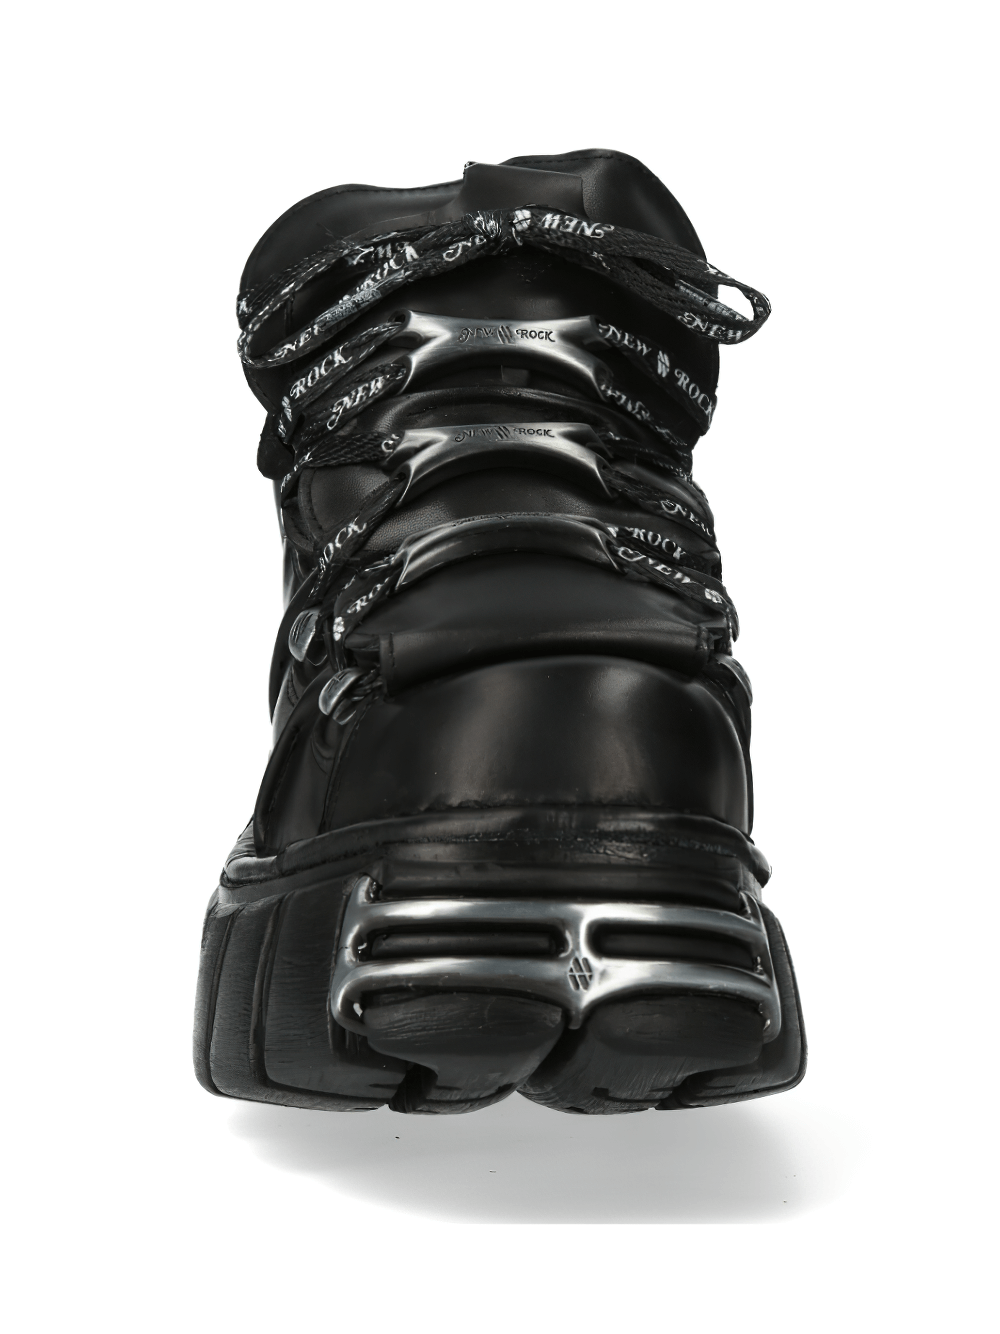 NEW ROCK Chunky Gothic Leather Ankle Boots: Punk And Rock